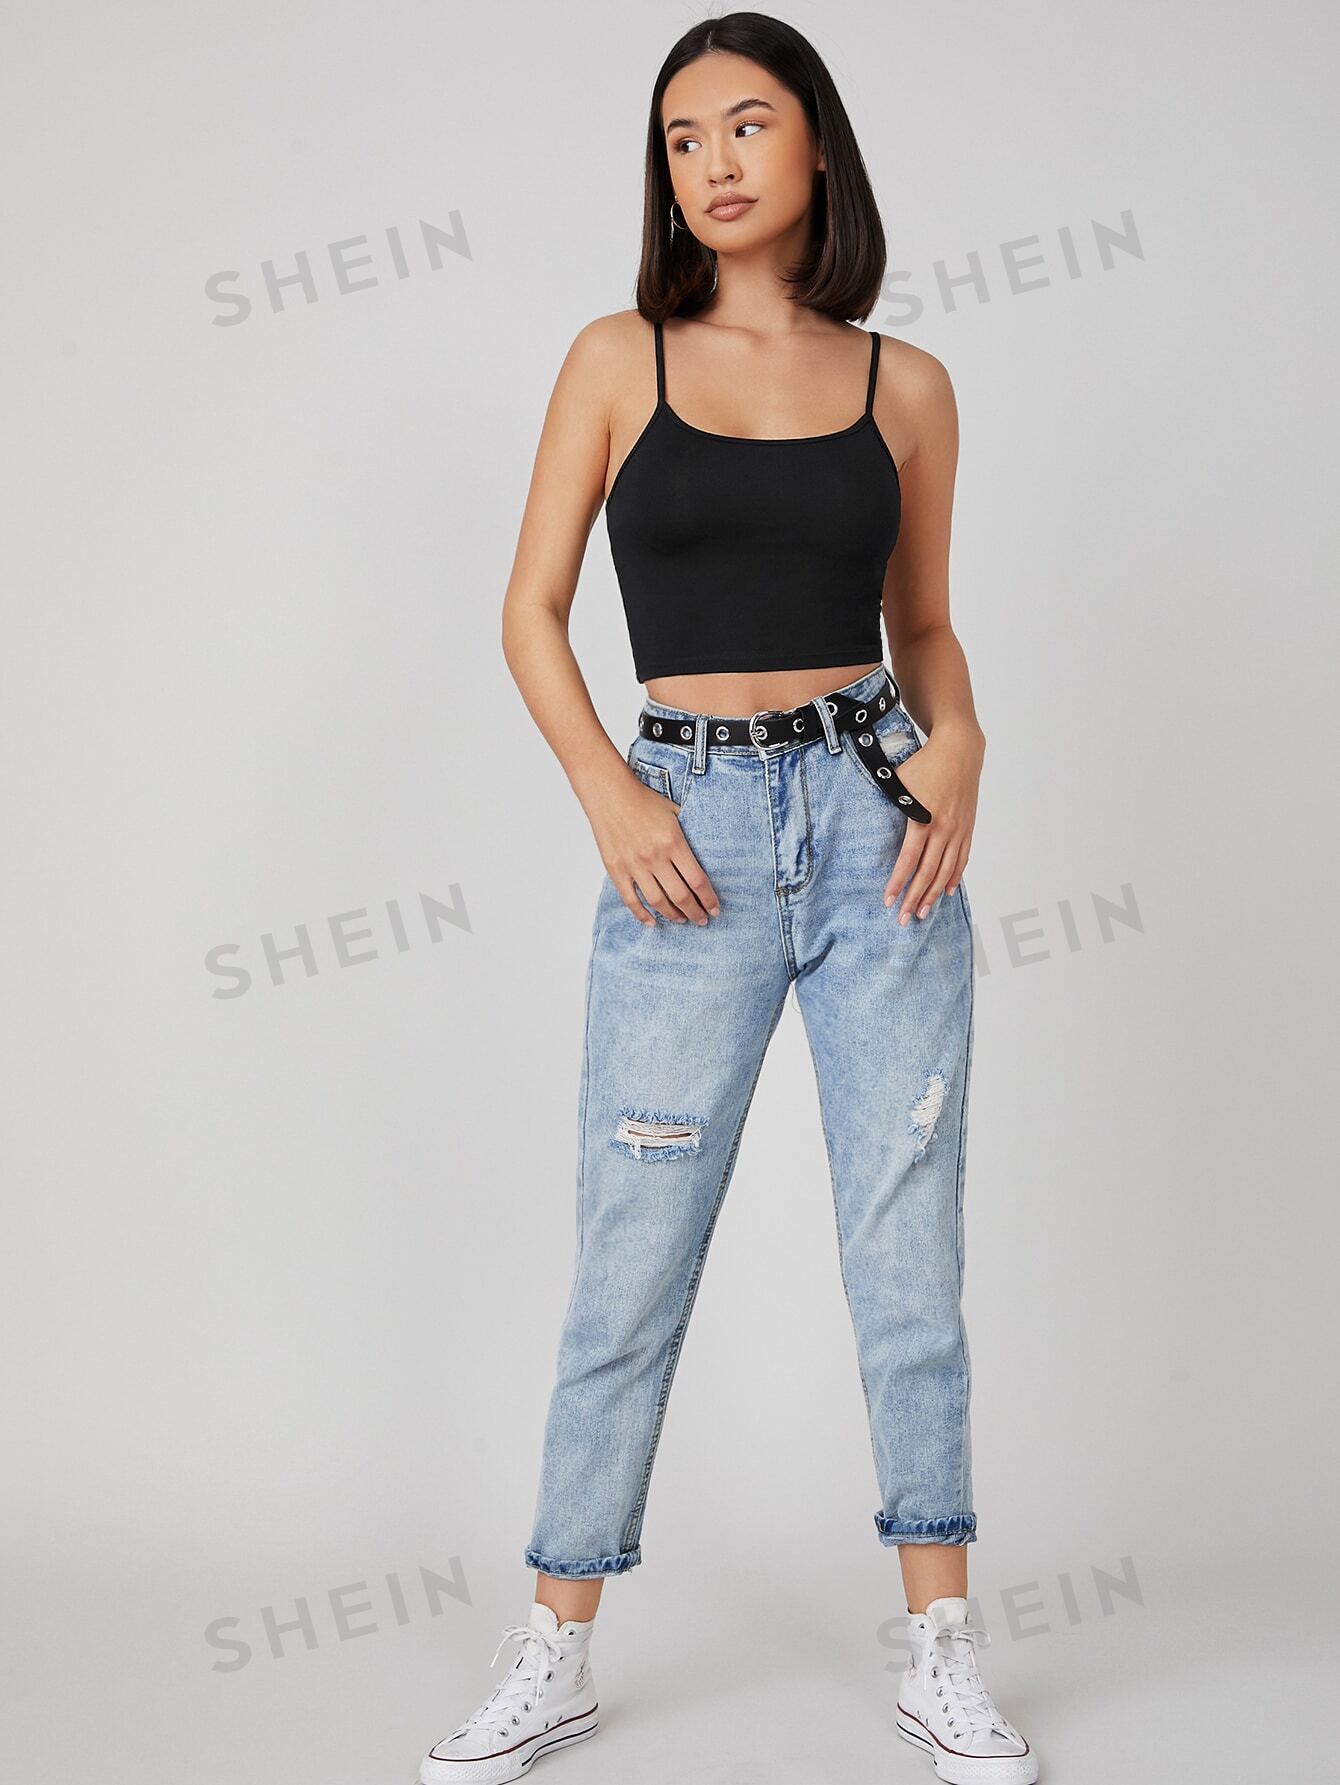 SHEIN BASICS Solid Form Fitted Crop Cami Top - Negative Apparel